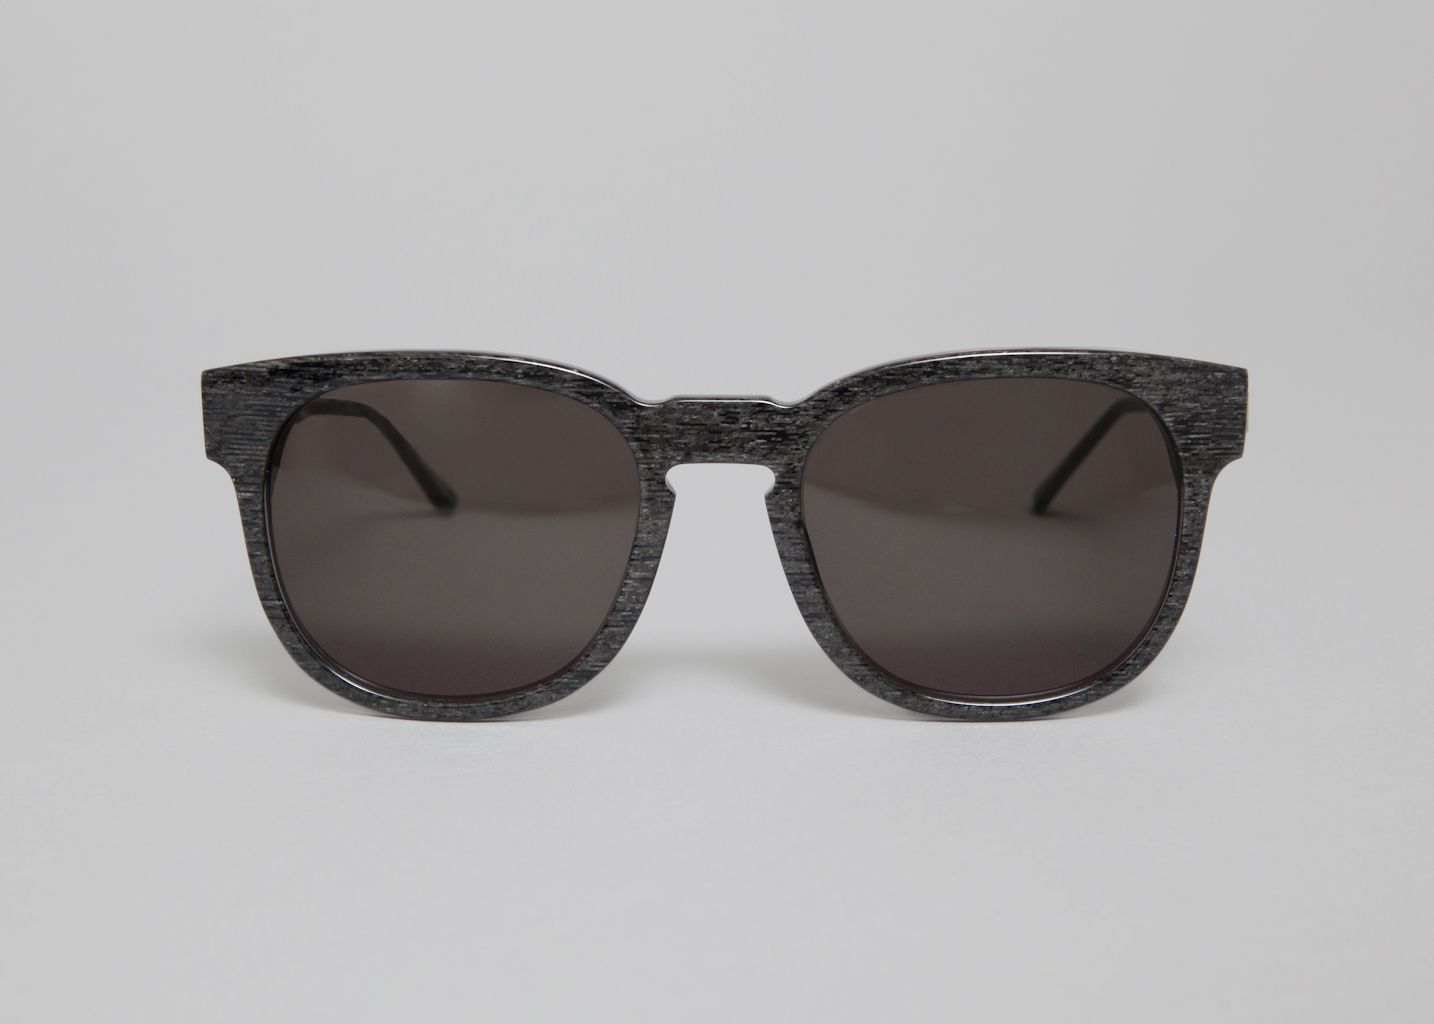 Authority Sunglasses - Thierry Lasry